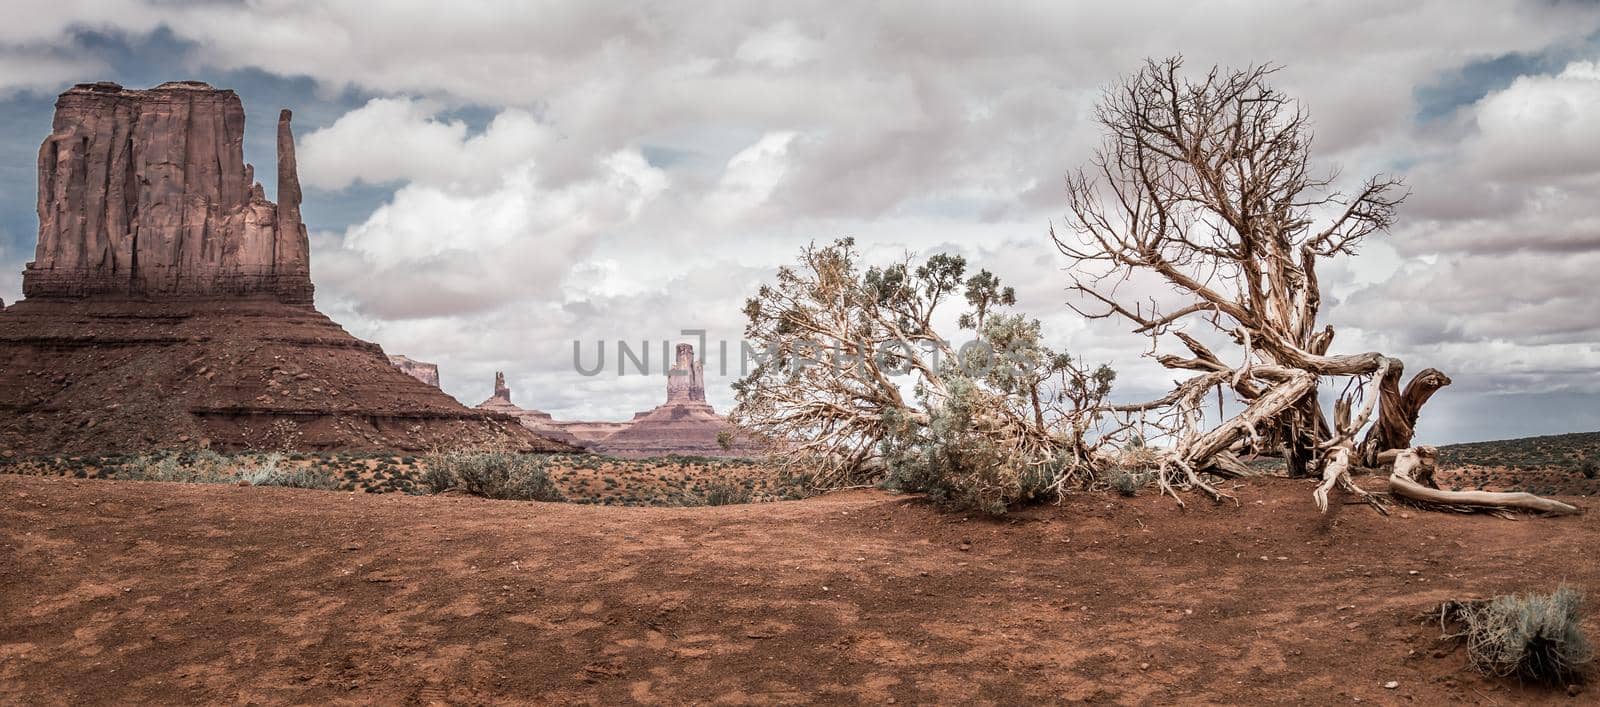 Dry tree in Monument valley, Utah, USA